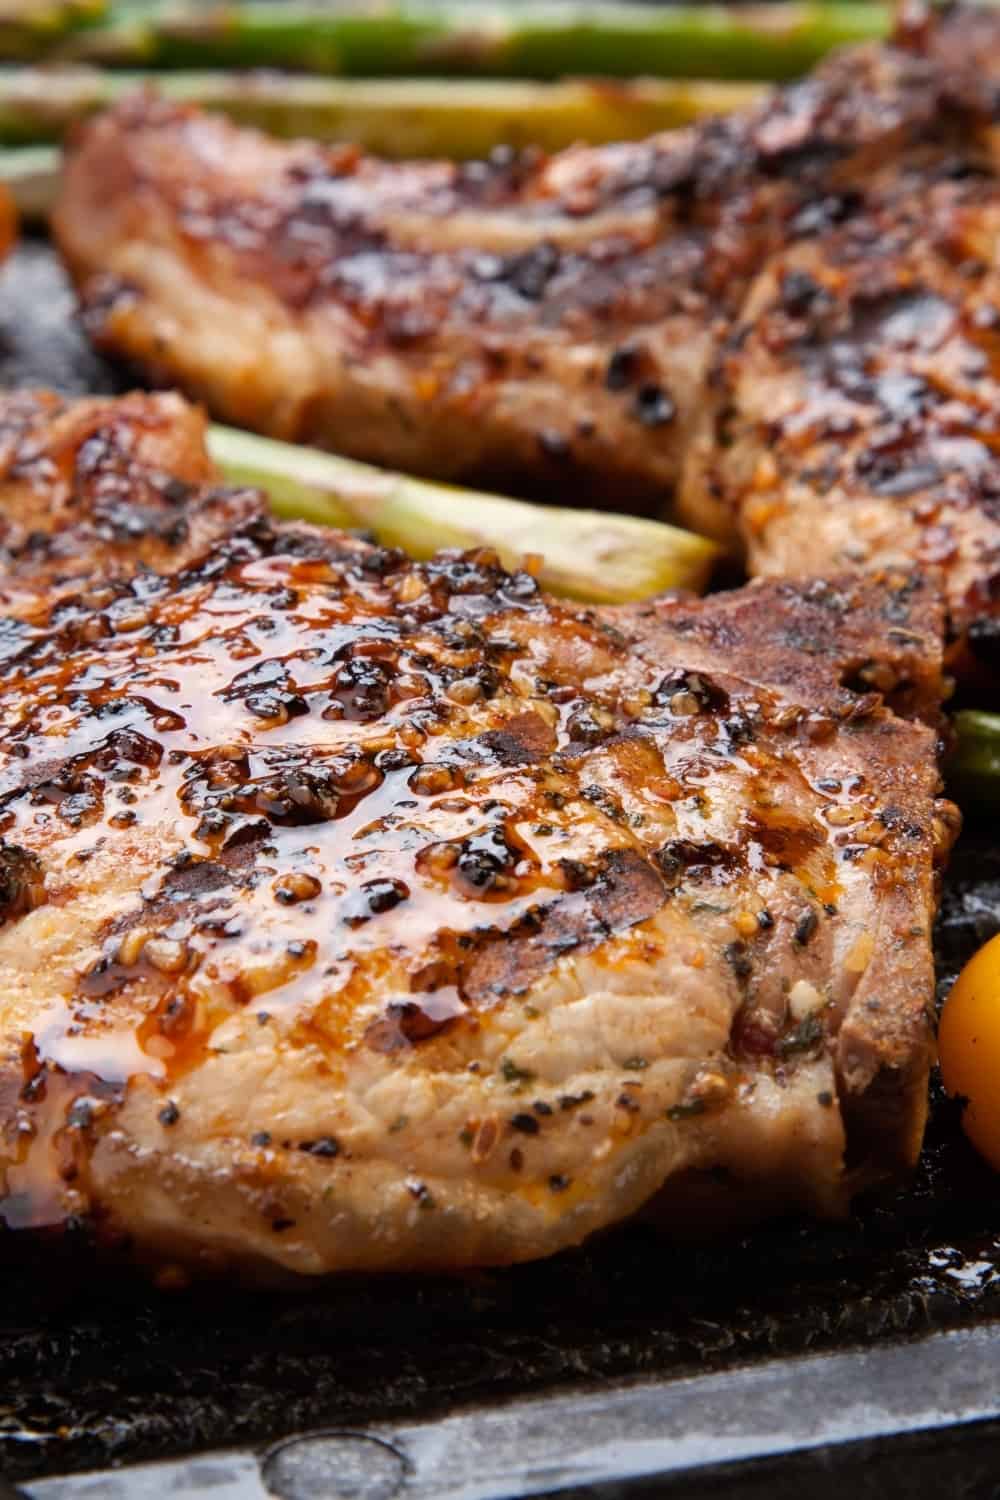 Juicy pork chops are grilled on griddle with asparagus and bell pepper.